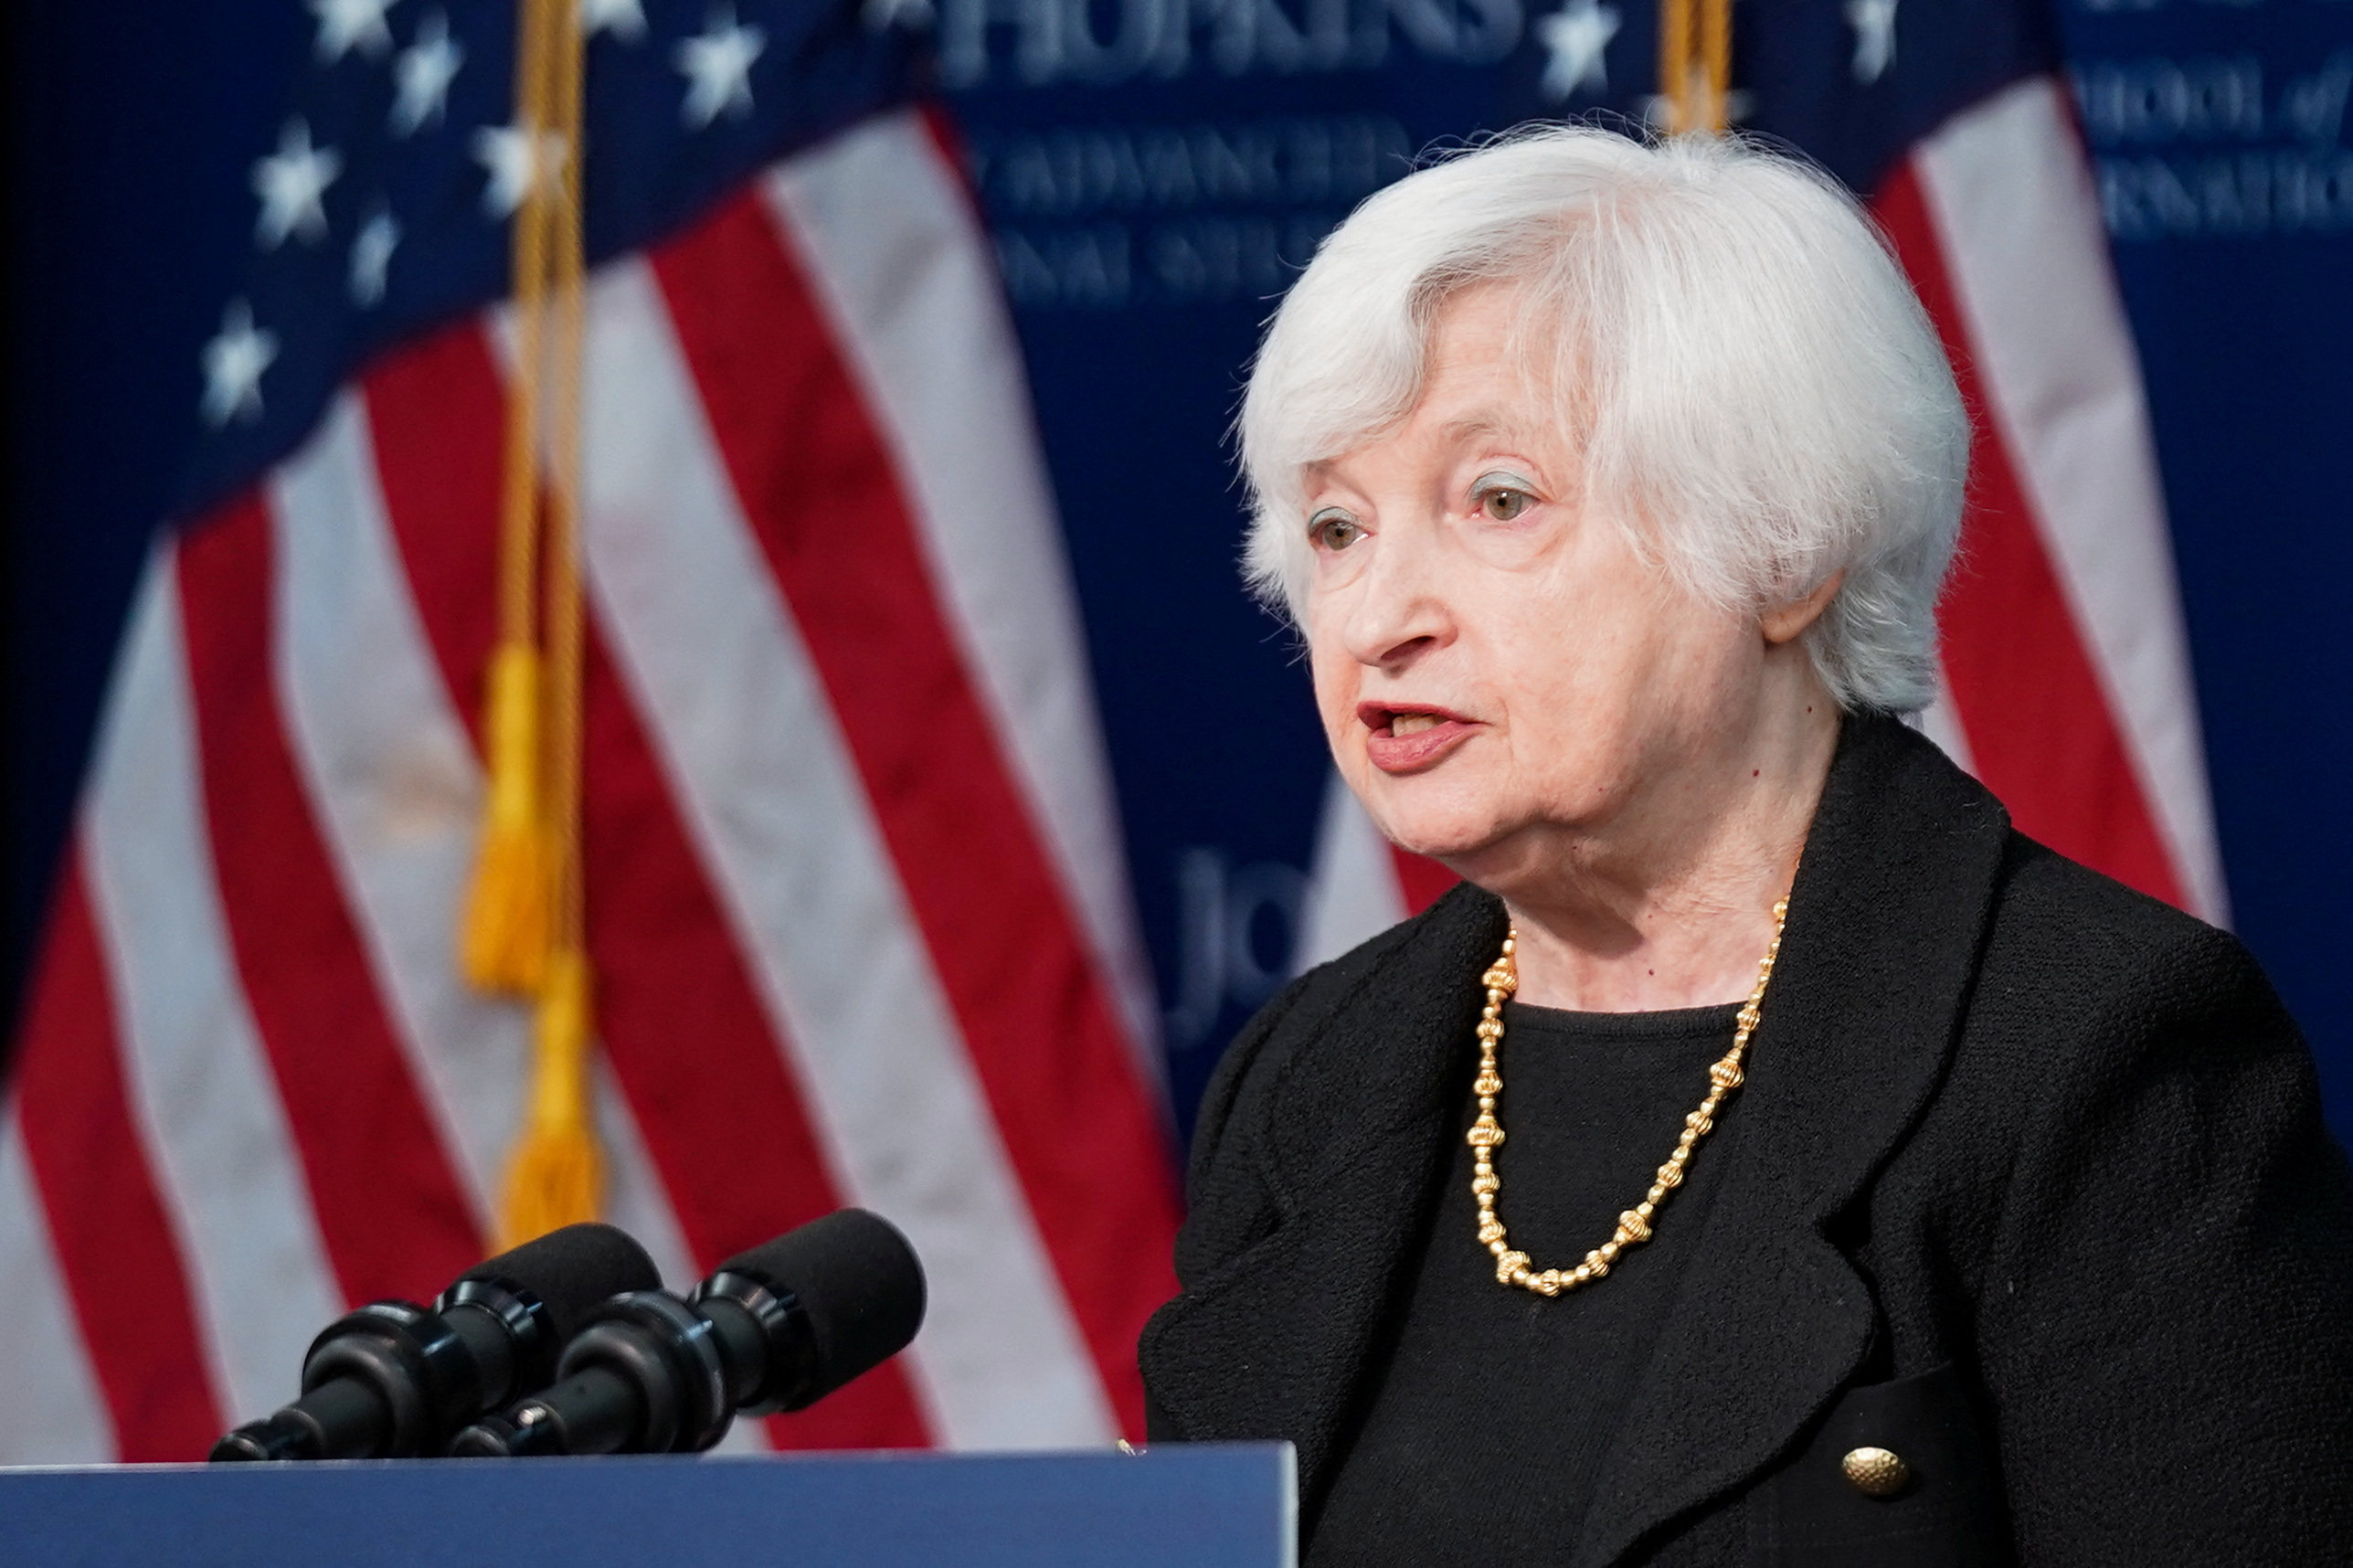 US Treasury chief Janet Yellen said decoupling could prove “disastrous”. Photo: Reuters